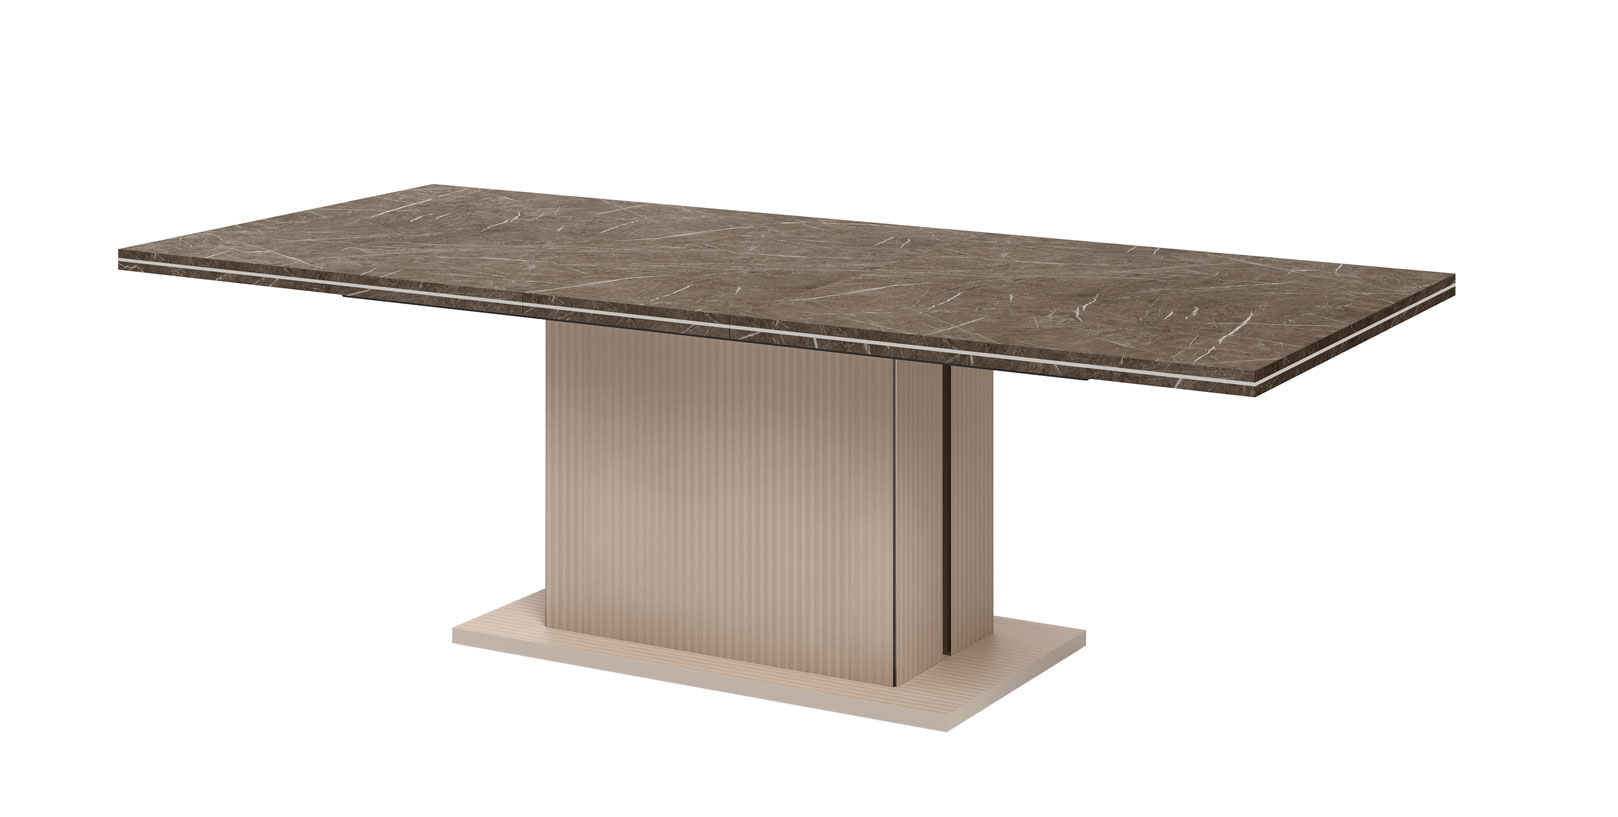 Dining Room Furniture Marble-Look Tables Fidia- Aris Dining table